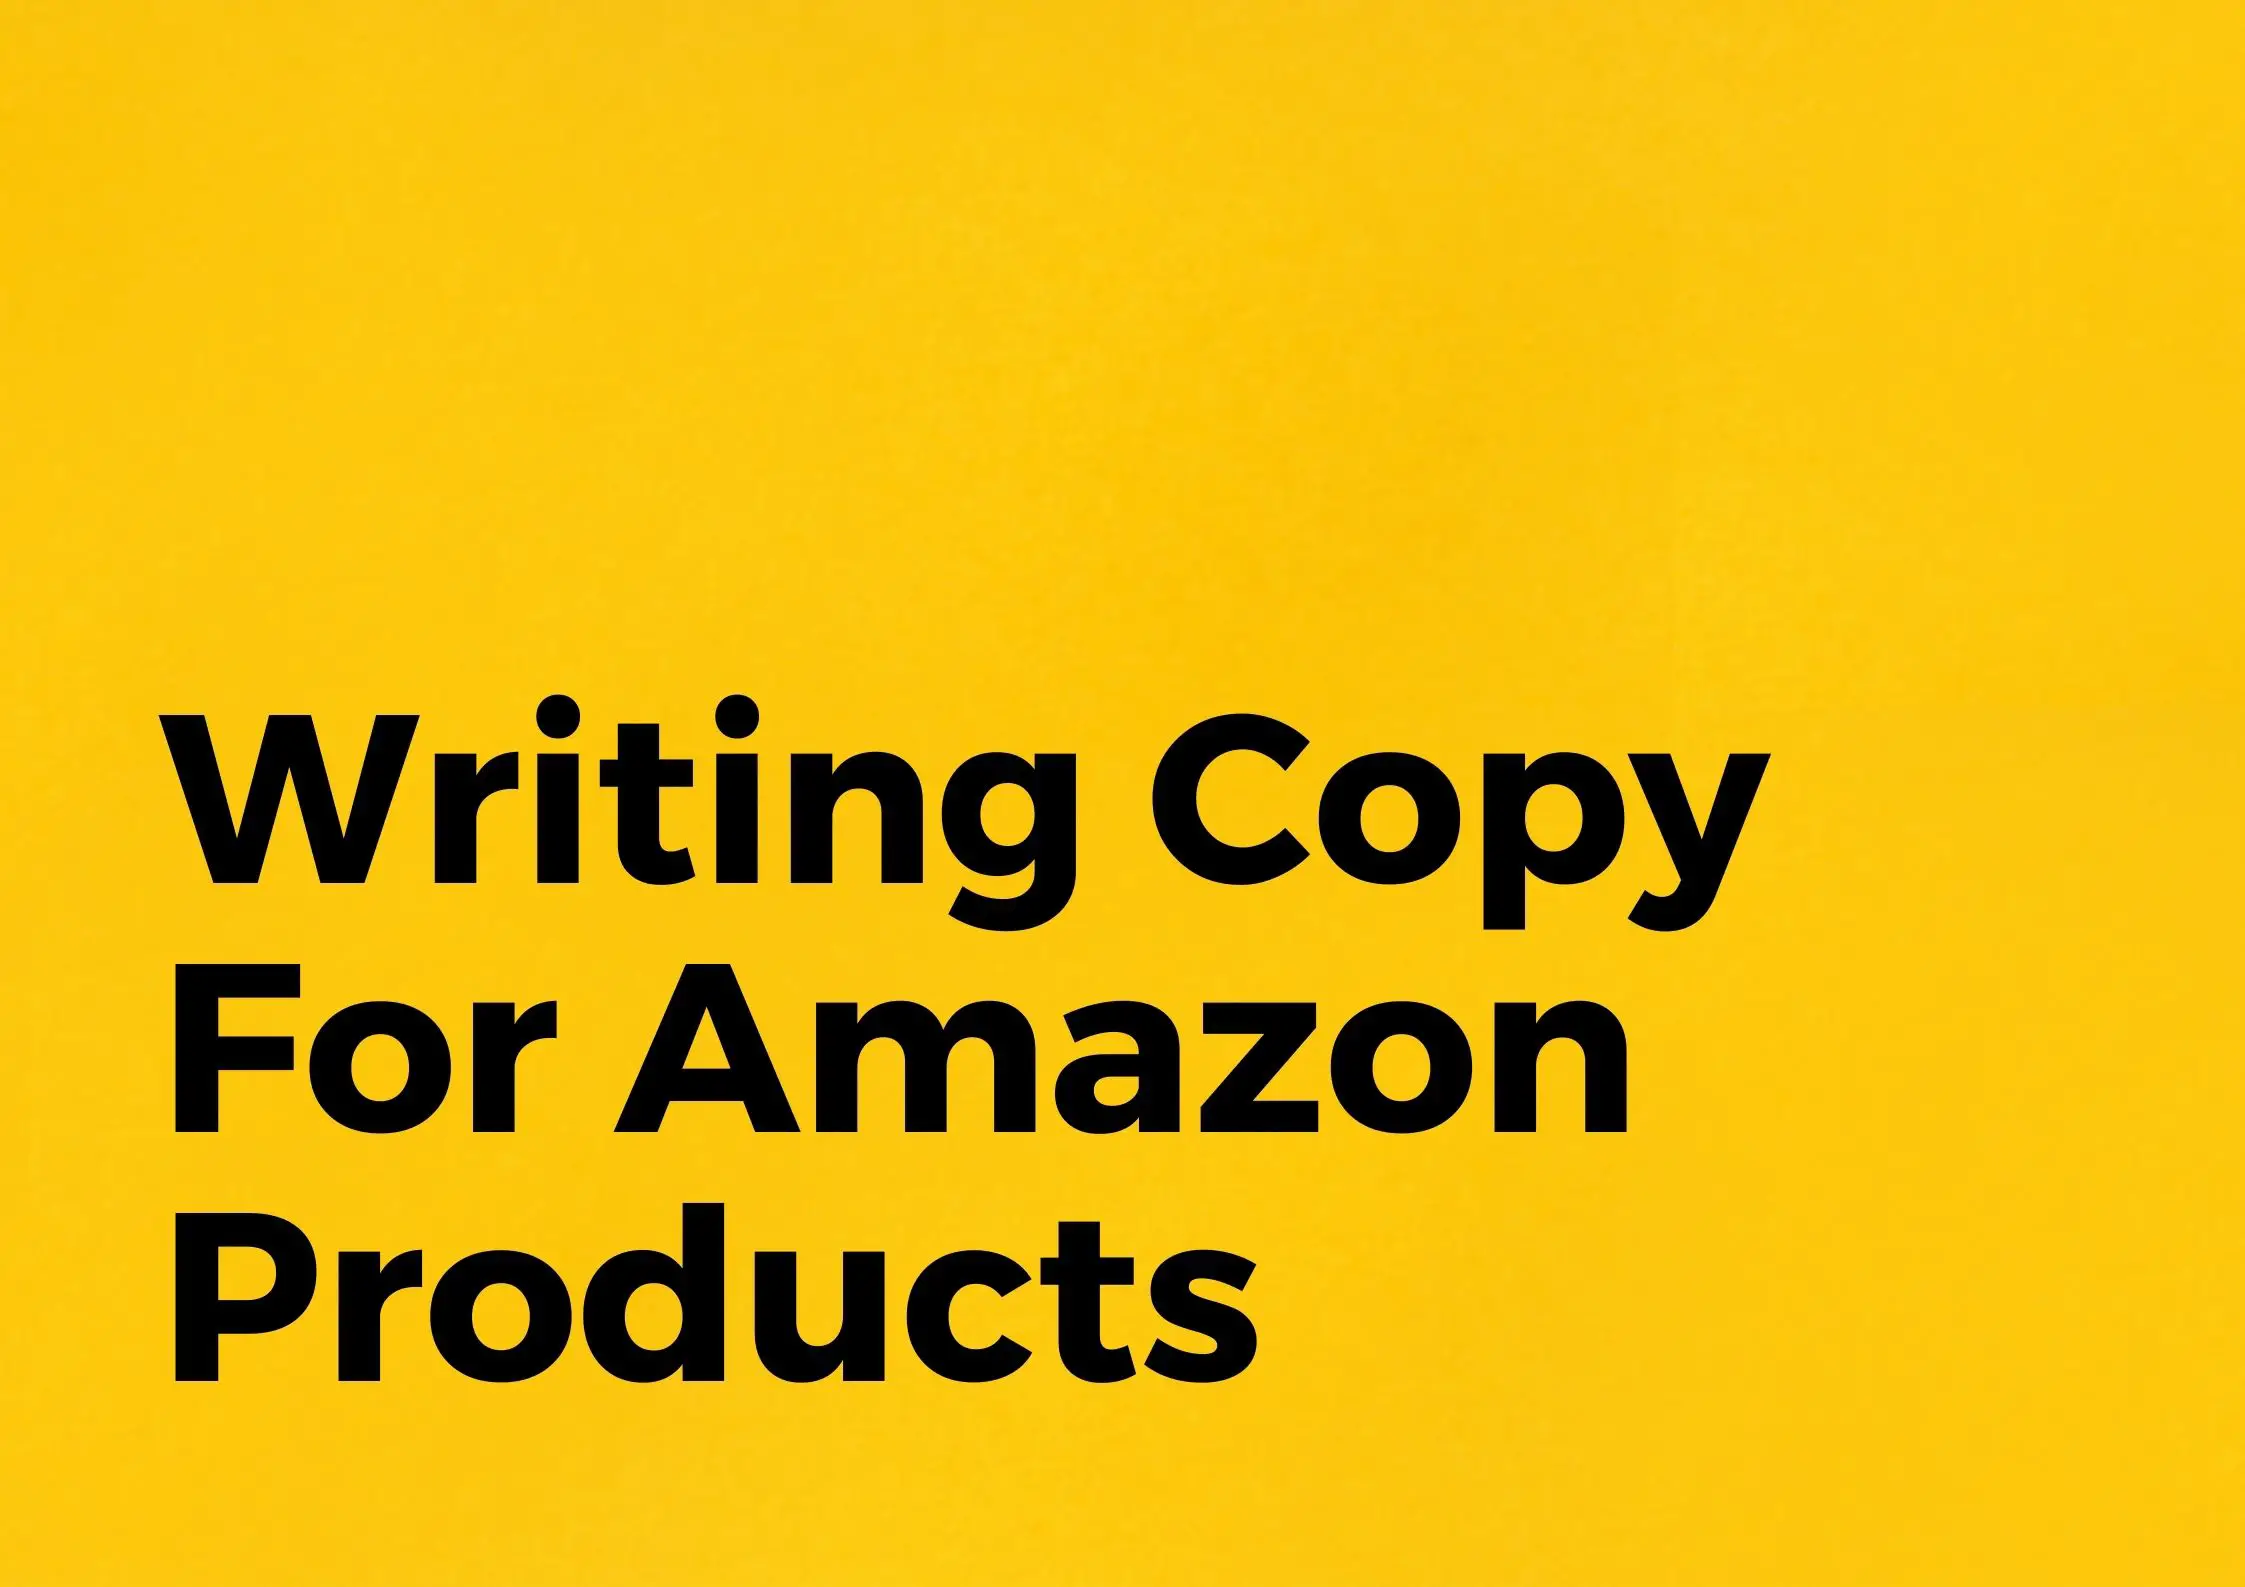 Writing Copy For Amazon Products